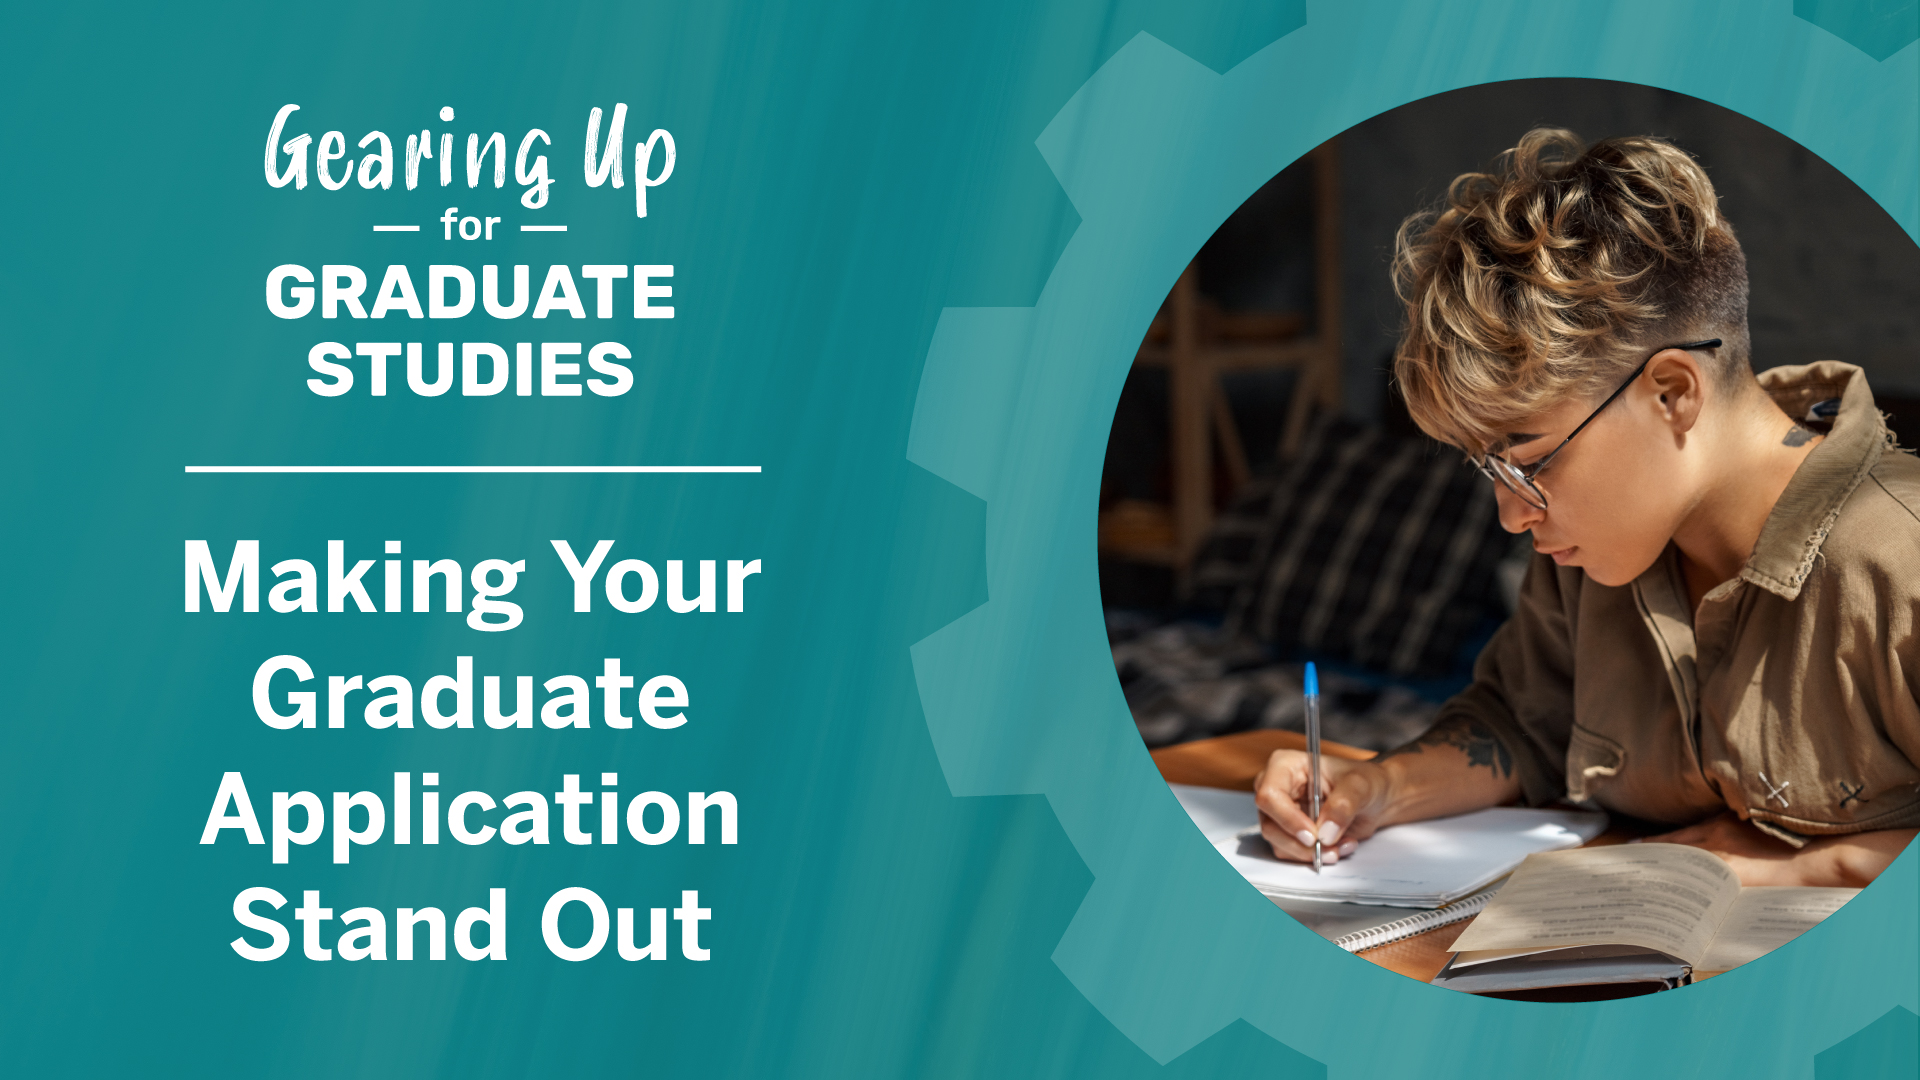 gearing up for grad studies - make your grad application stand out